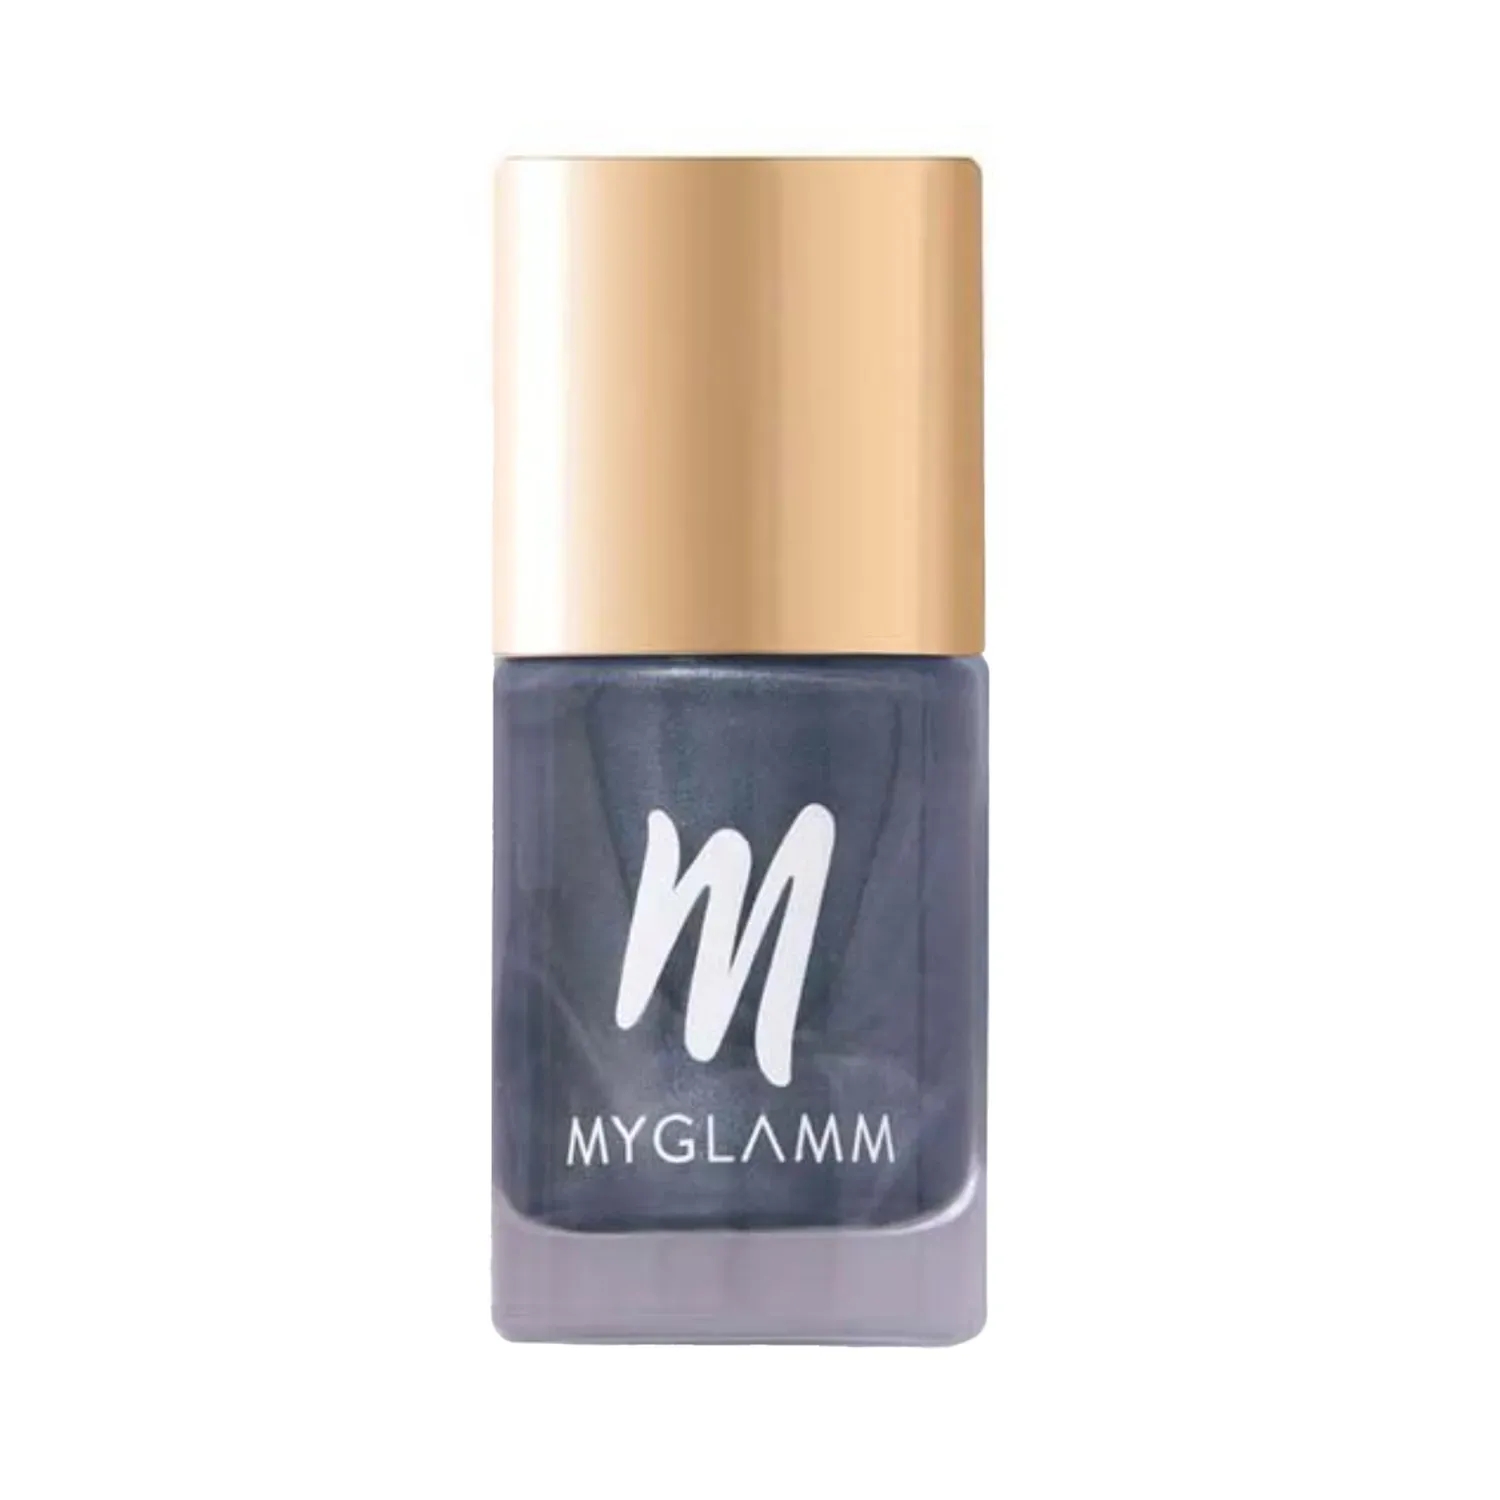 Buy MI Fashion Matte Nail Polish Truly Unique Set of 2 Wide Brush  (Black,Purple) 9.9ml each Online at Low Prices in India - Amazon.in